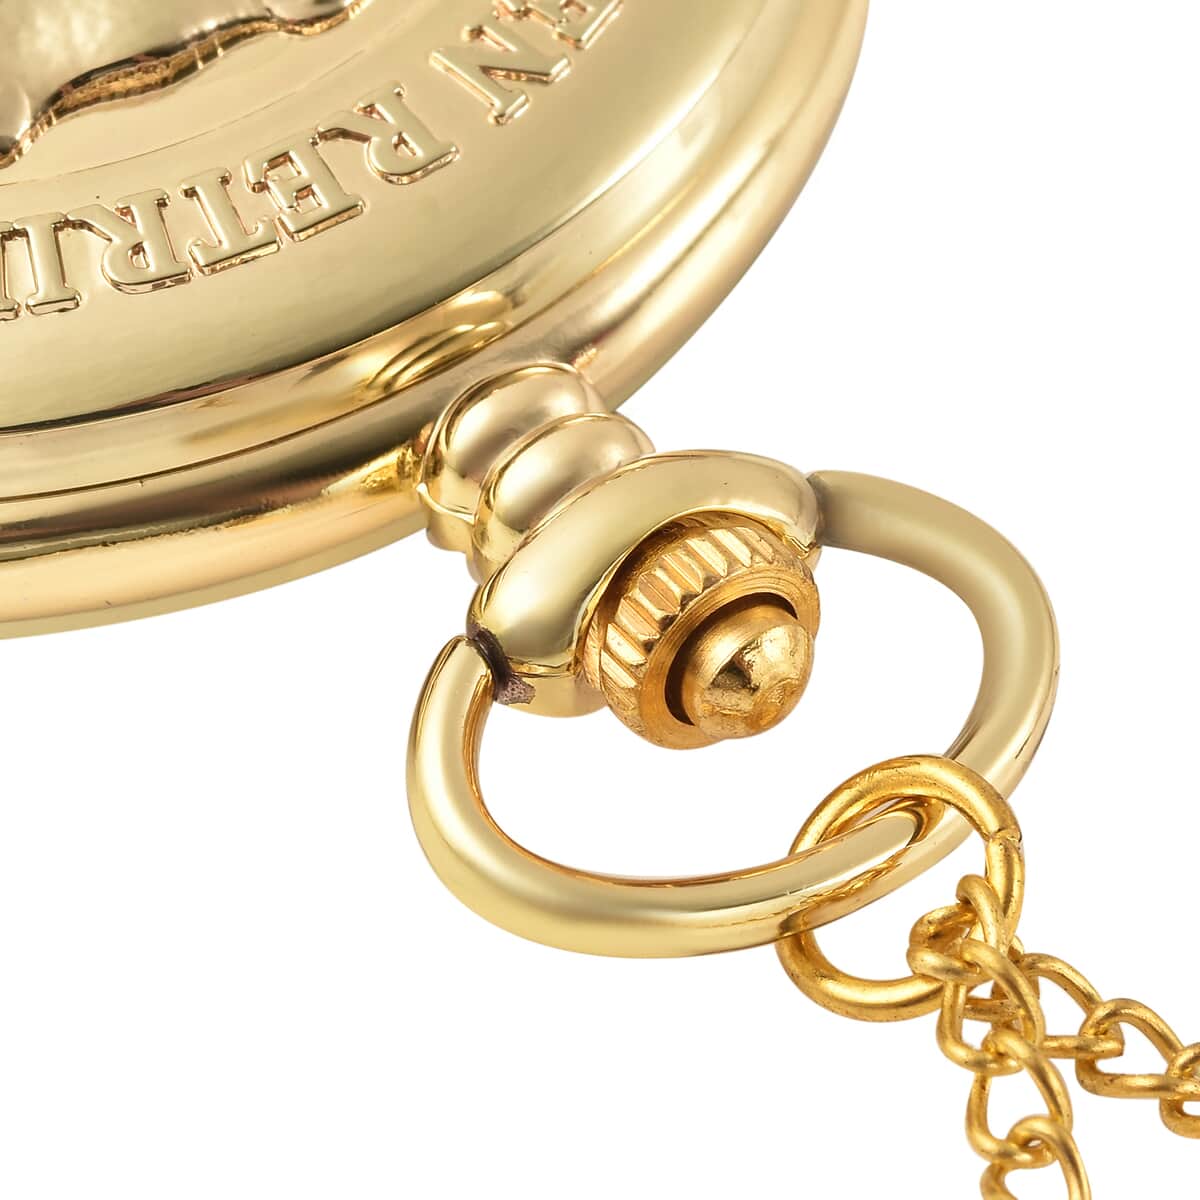 Strada Japanese Movement Golden Retriever Pocket Watch in Goldtone with Chain (31 Inches) image number 5